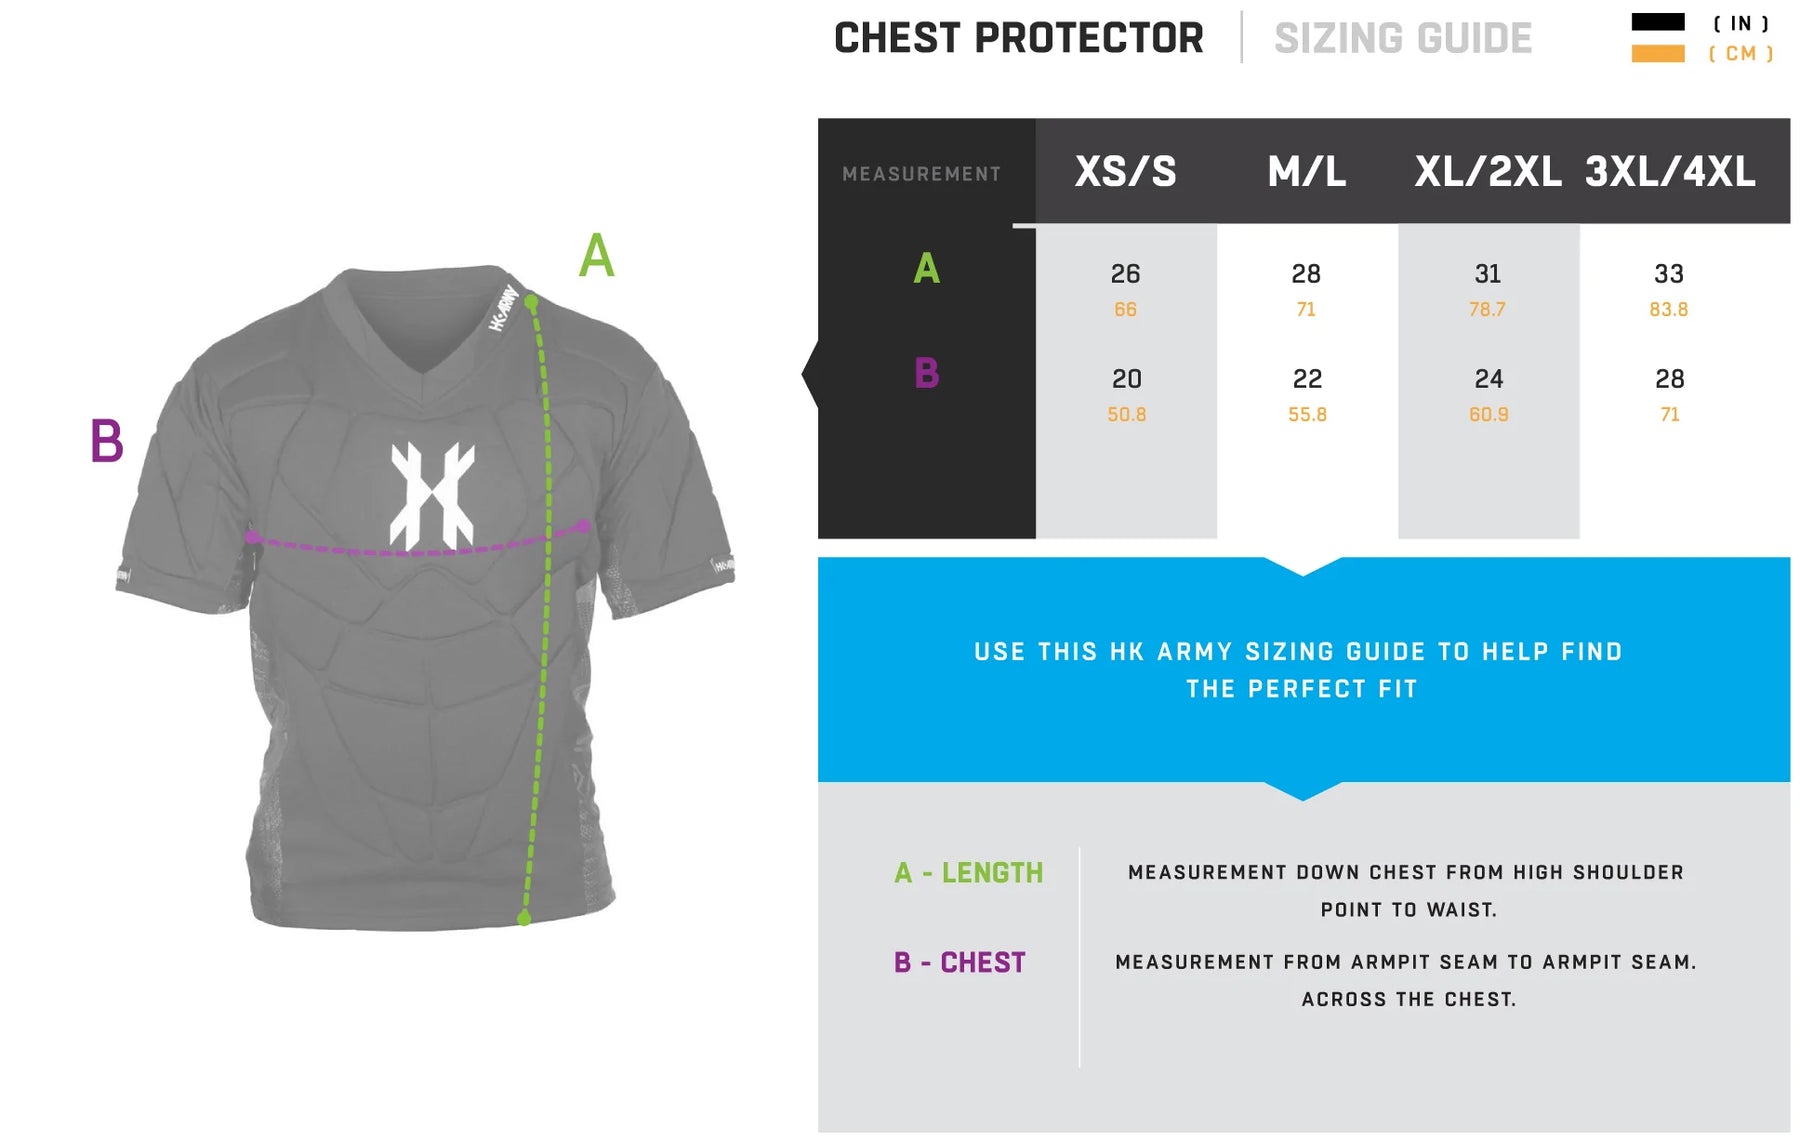 Crash Chest Protector Performance Padded Paintball Shirt | Hk Army